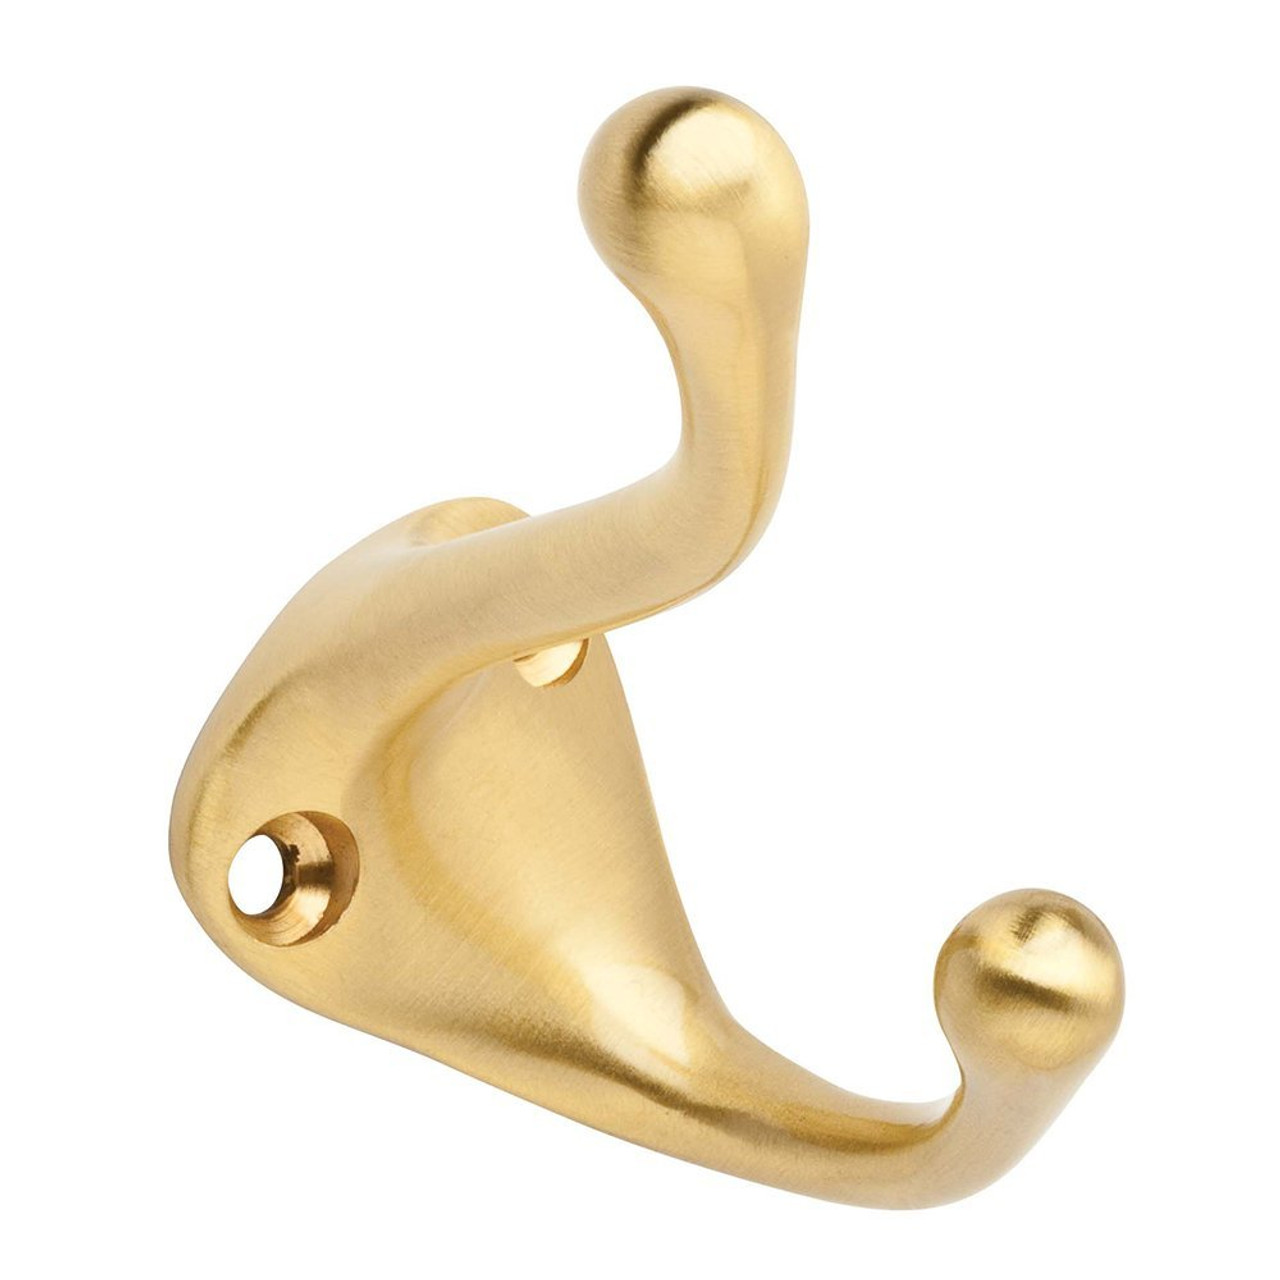 Ives 572B-US4 Satin Brass (Brass) Coat and Hat Hook